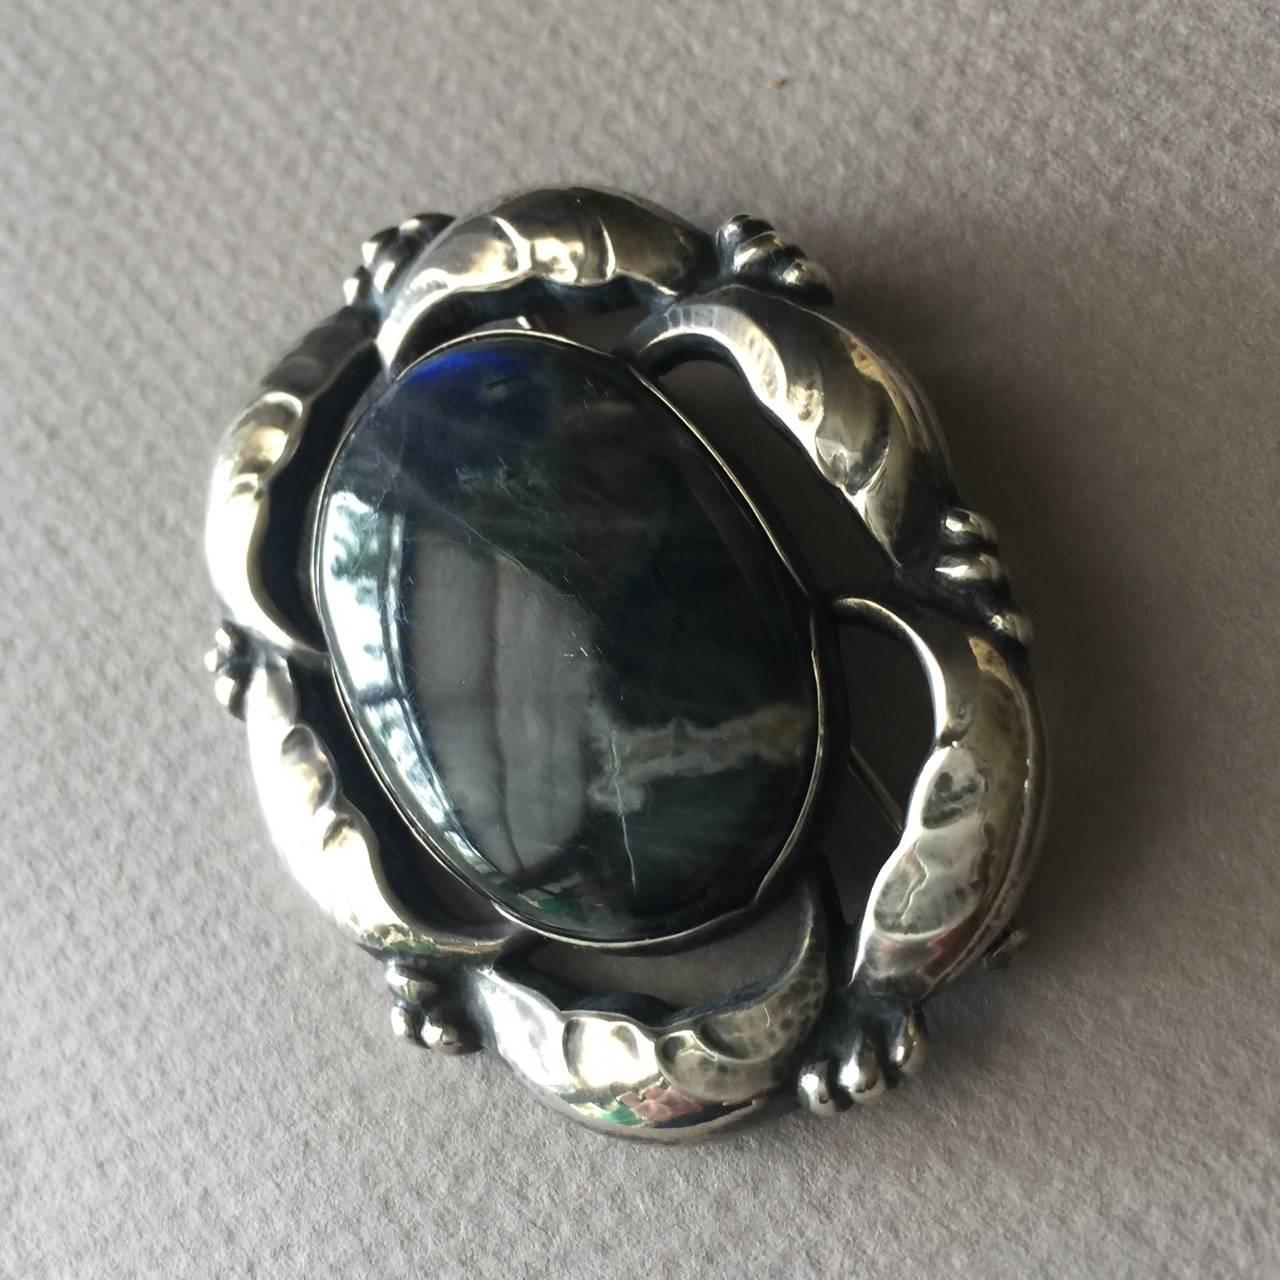 Georg Jensen Sterling Silver Brooch No. 130 with Labradorite

Amazingly beautiful sterling silver brooch with a large, gem quality labradorite gemstone surrounded by sterling silver from Denmark. The labradorite looks like the planet Earth, with